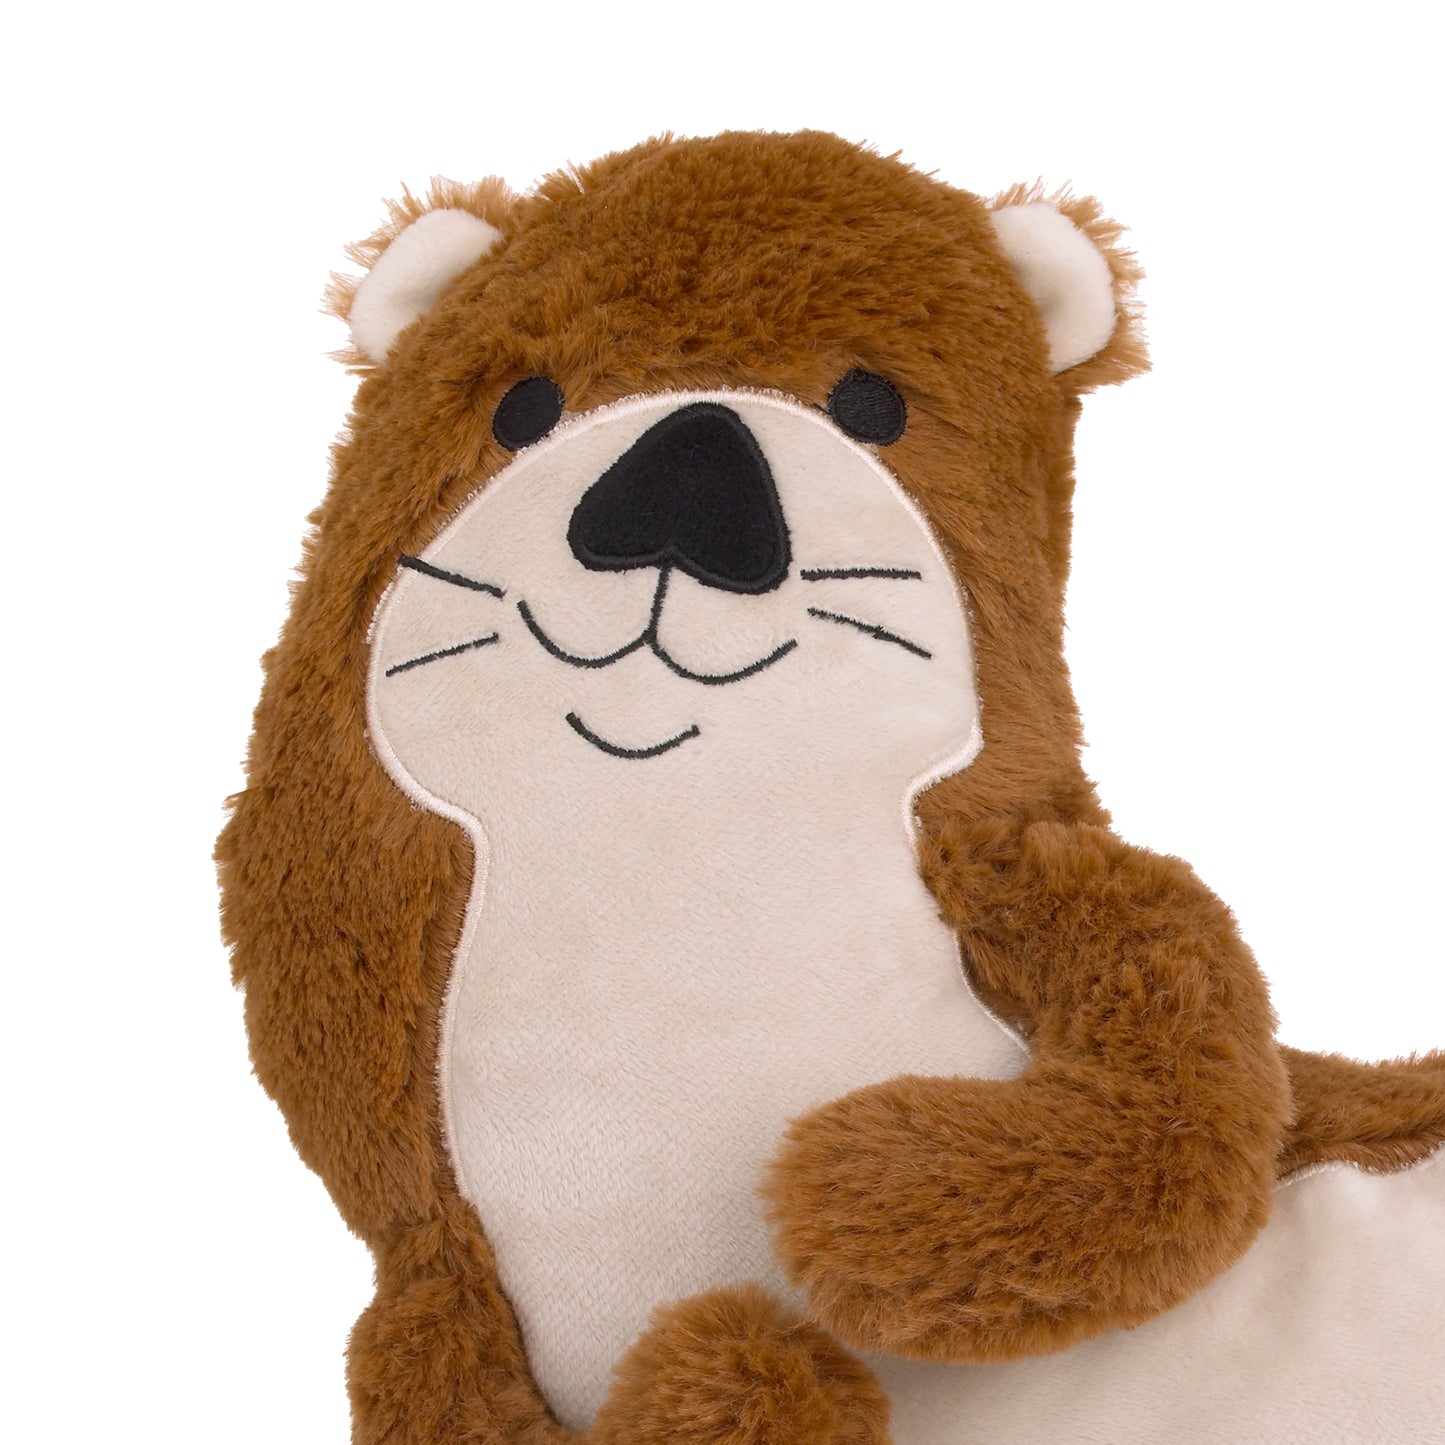 Little Love by NoJo Buddy the Super Soft Brown Otter Plush Stuffed Animal